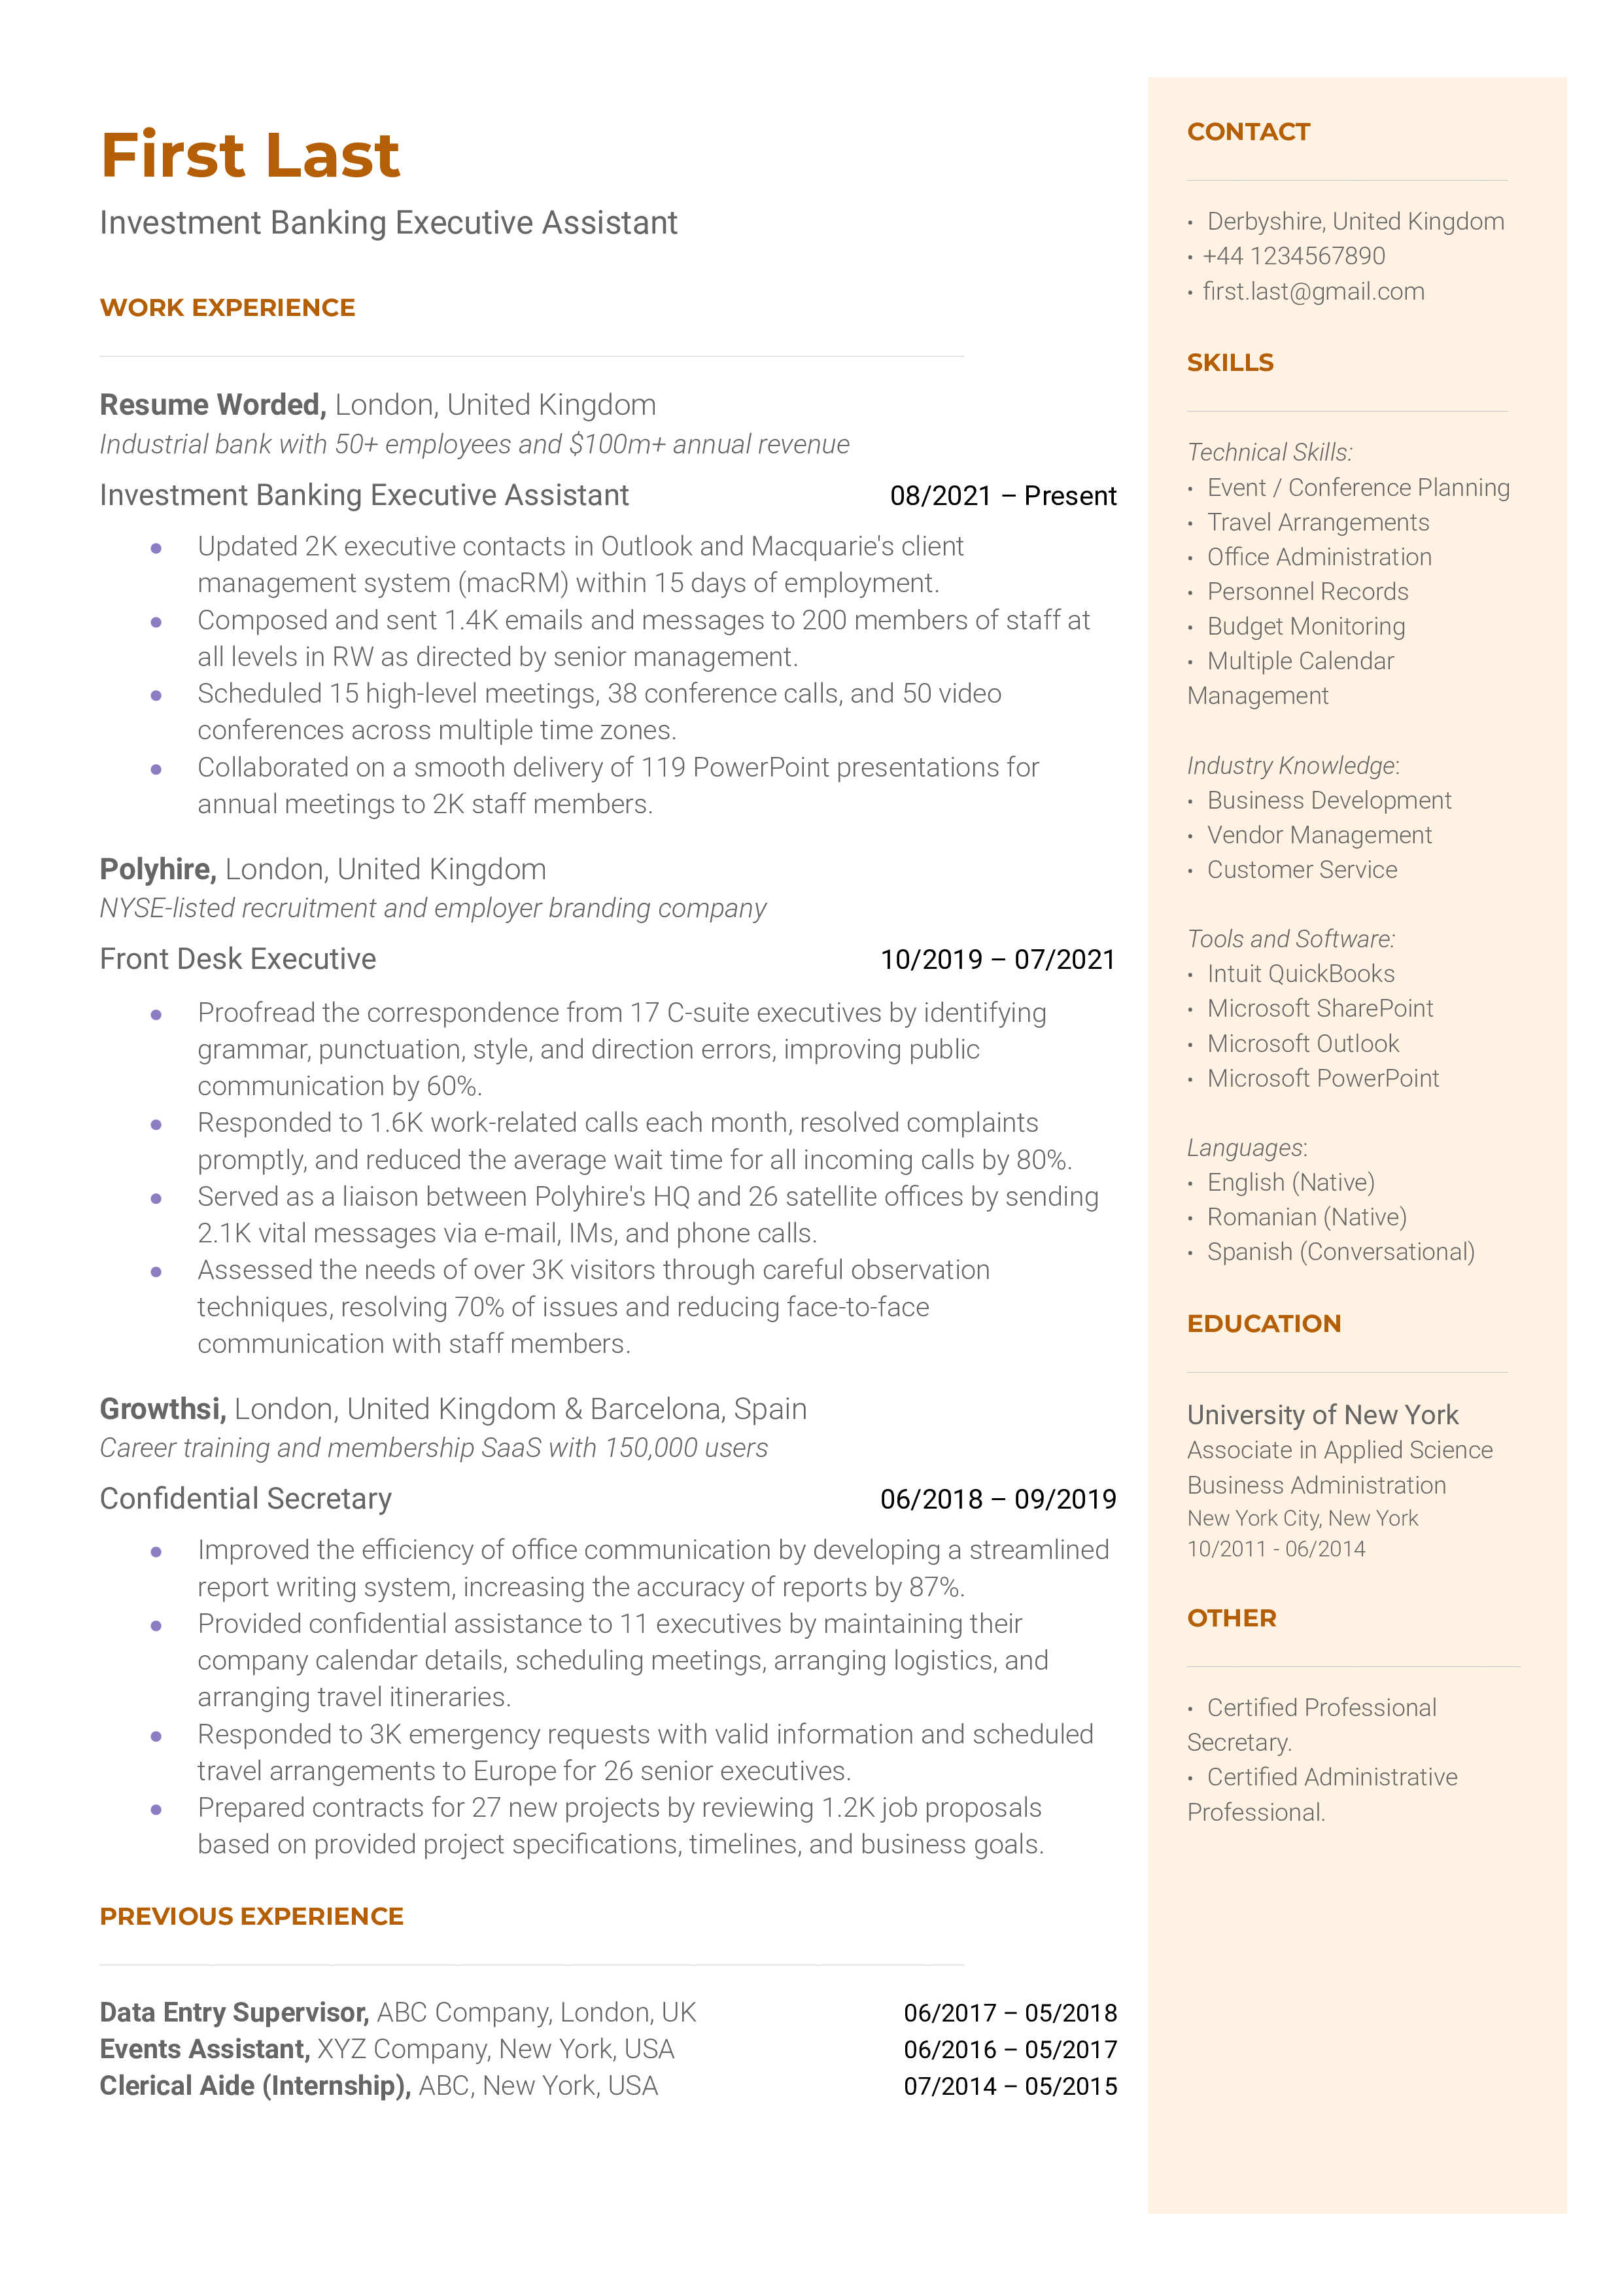 Investment Banking Executive Assistant Resume Sample